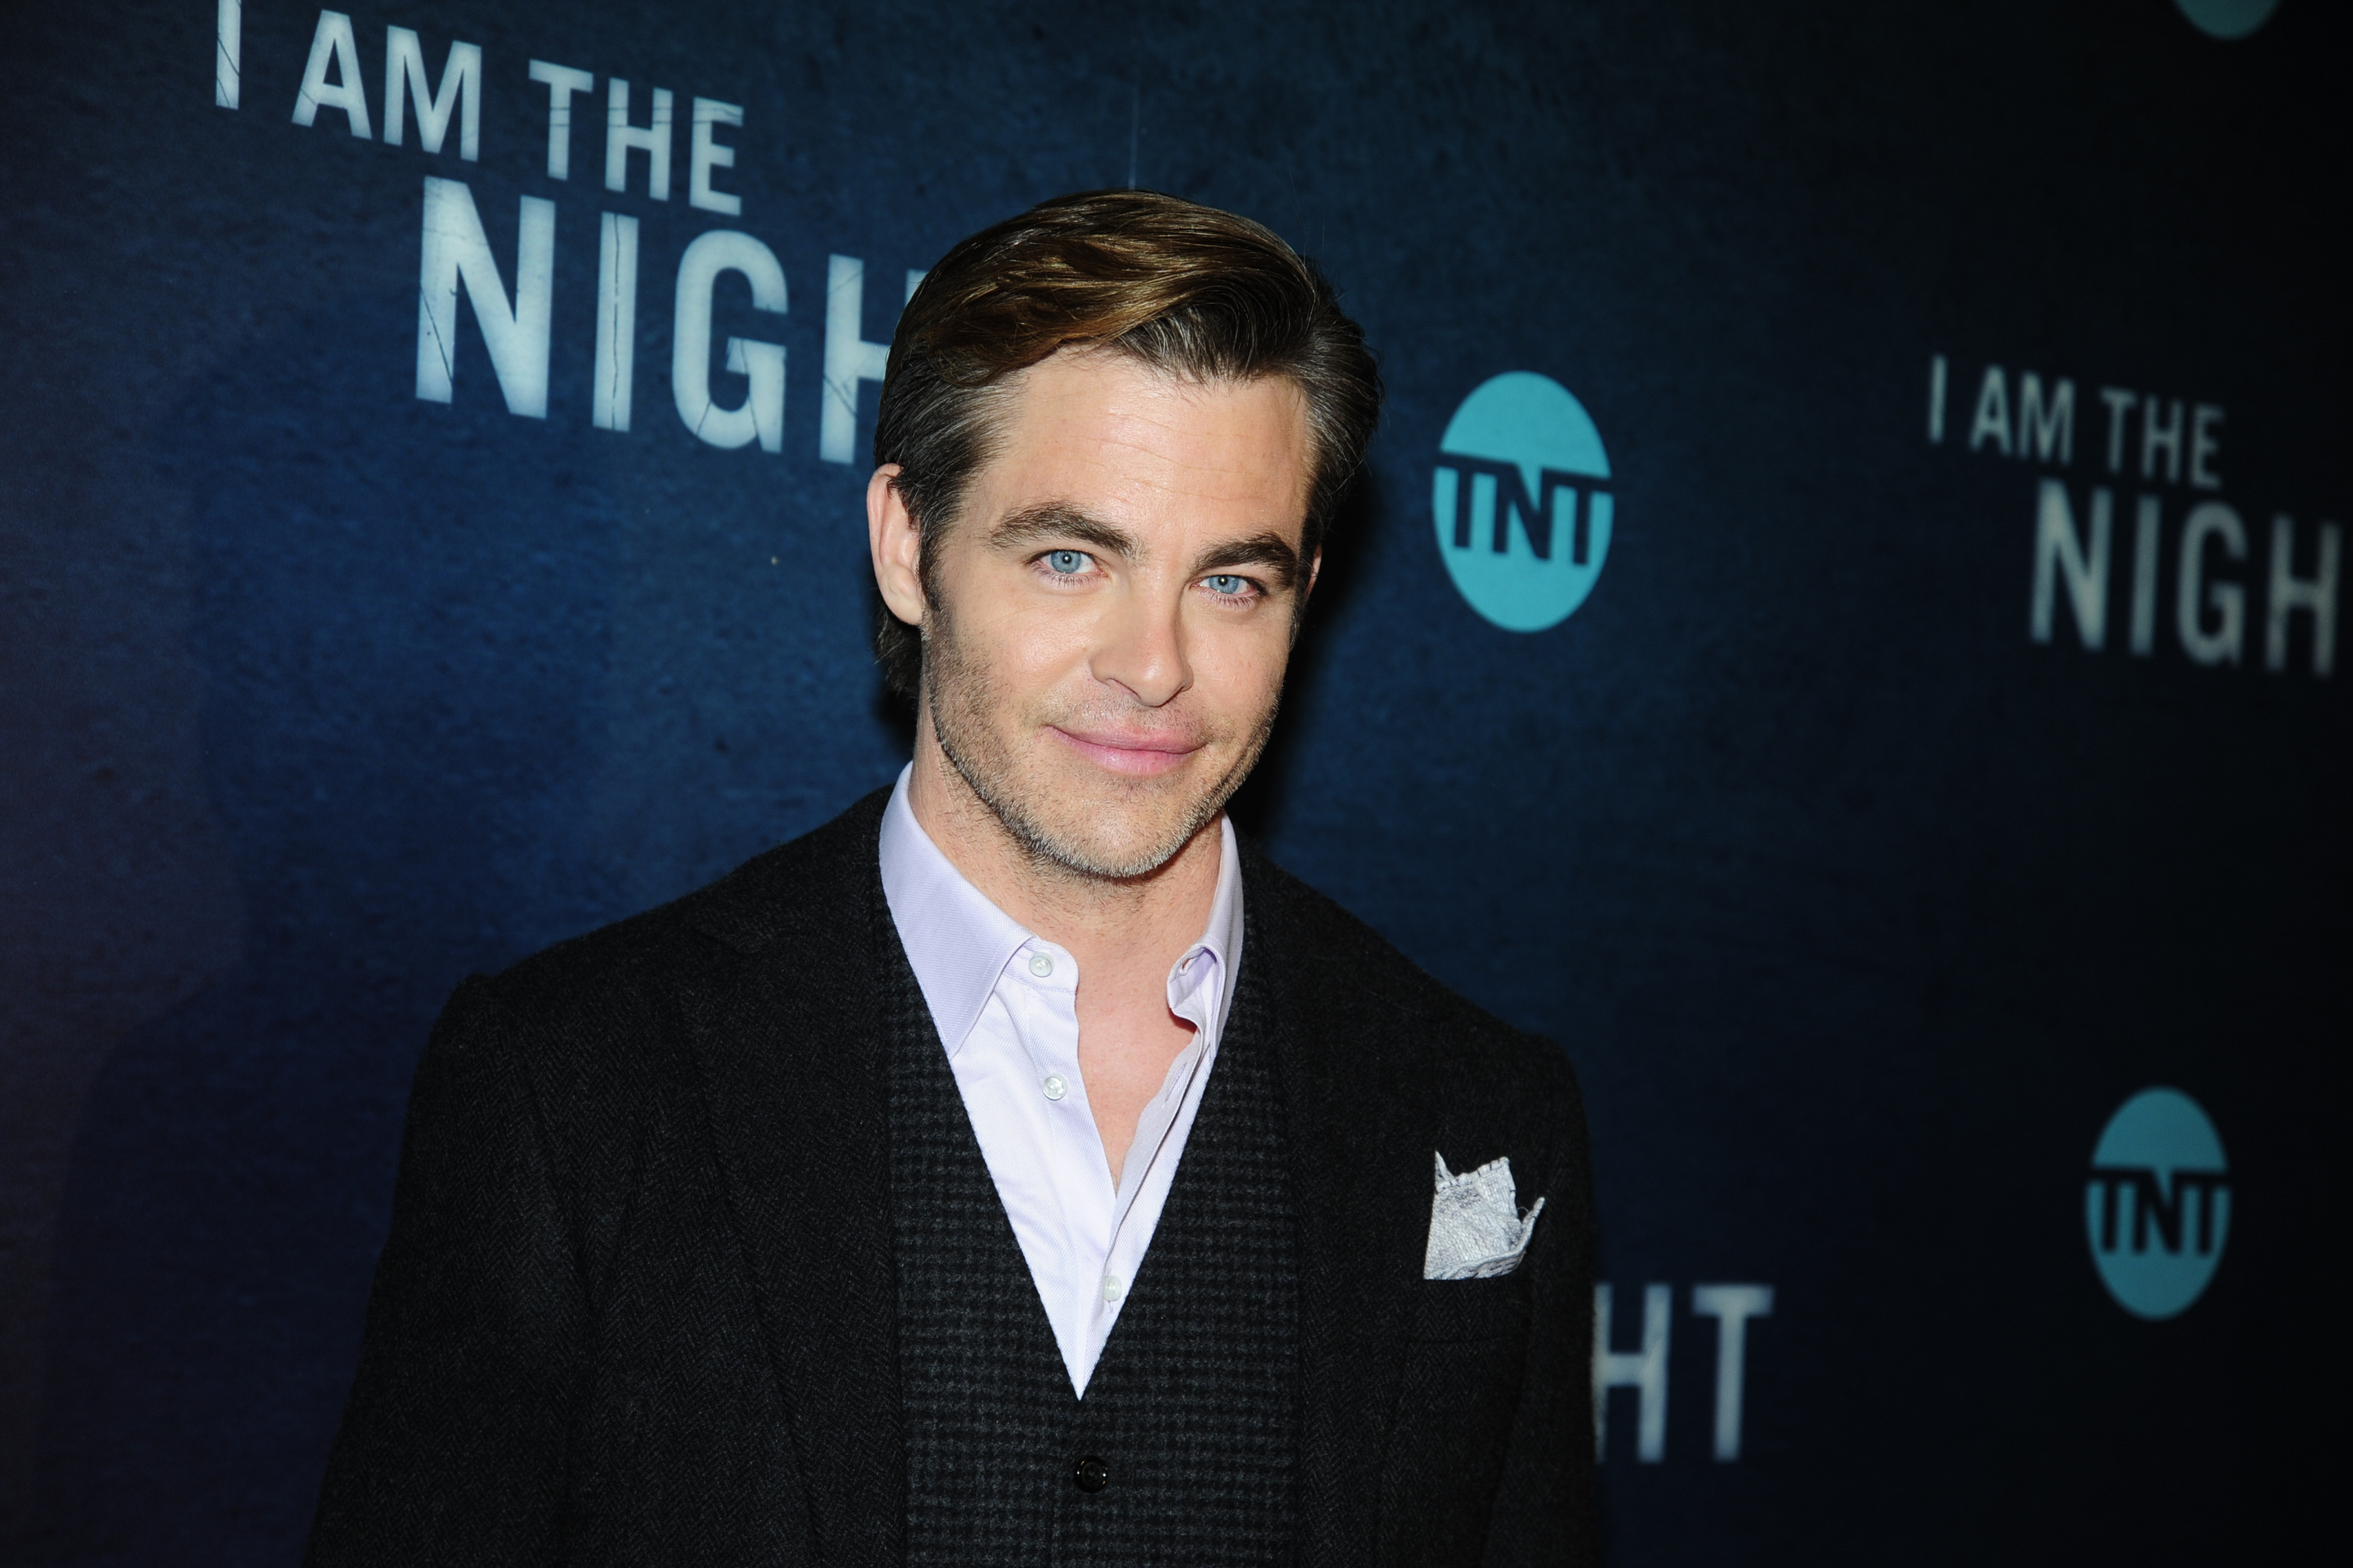 Chris Pine at the premiere of TNT's "I Am the Night" on January 22, 2019, in New York City. | Source: Getty Images